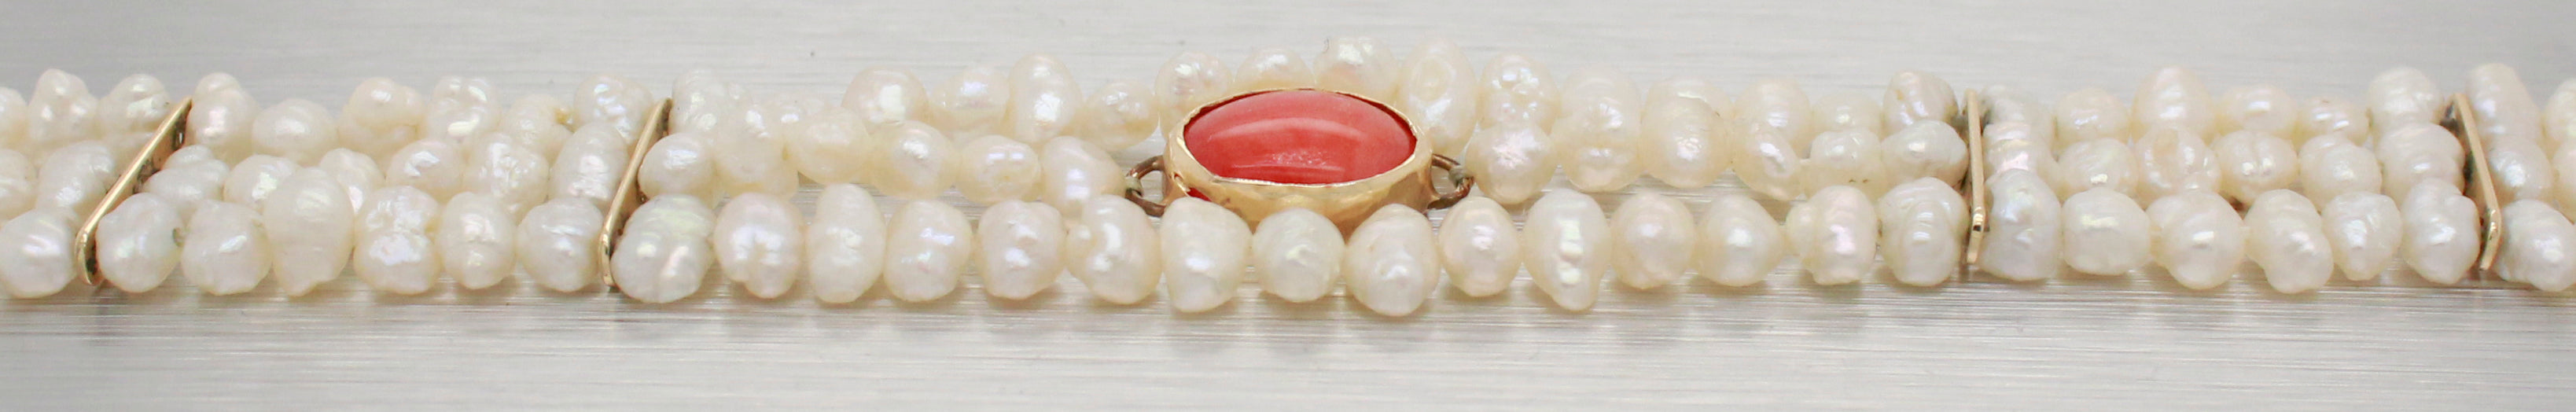 Vintage Red Coral and Pearl Beaded Strand Bracelet with 14k Yellow Gold - 7.00"